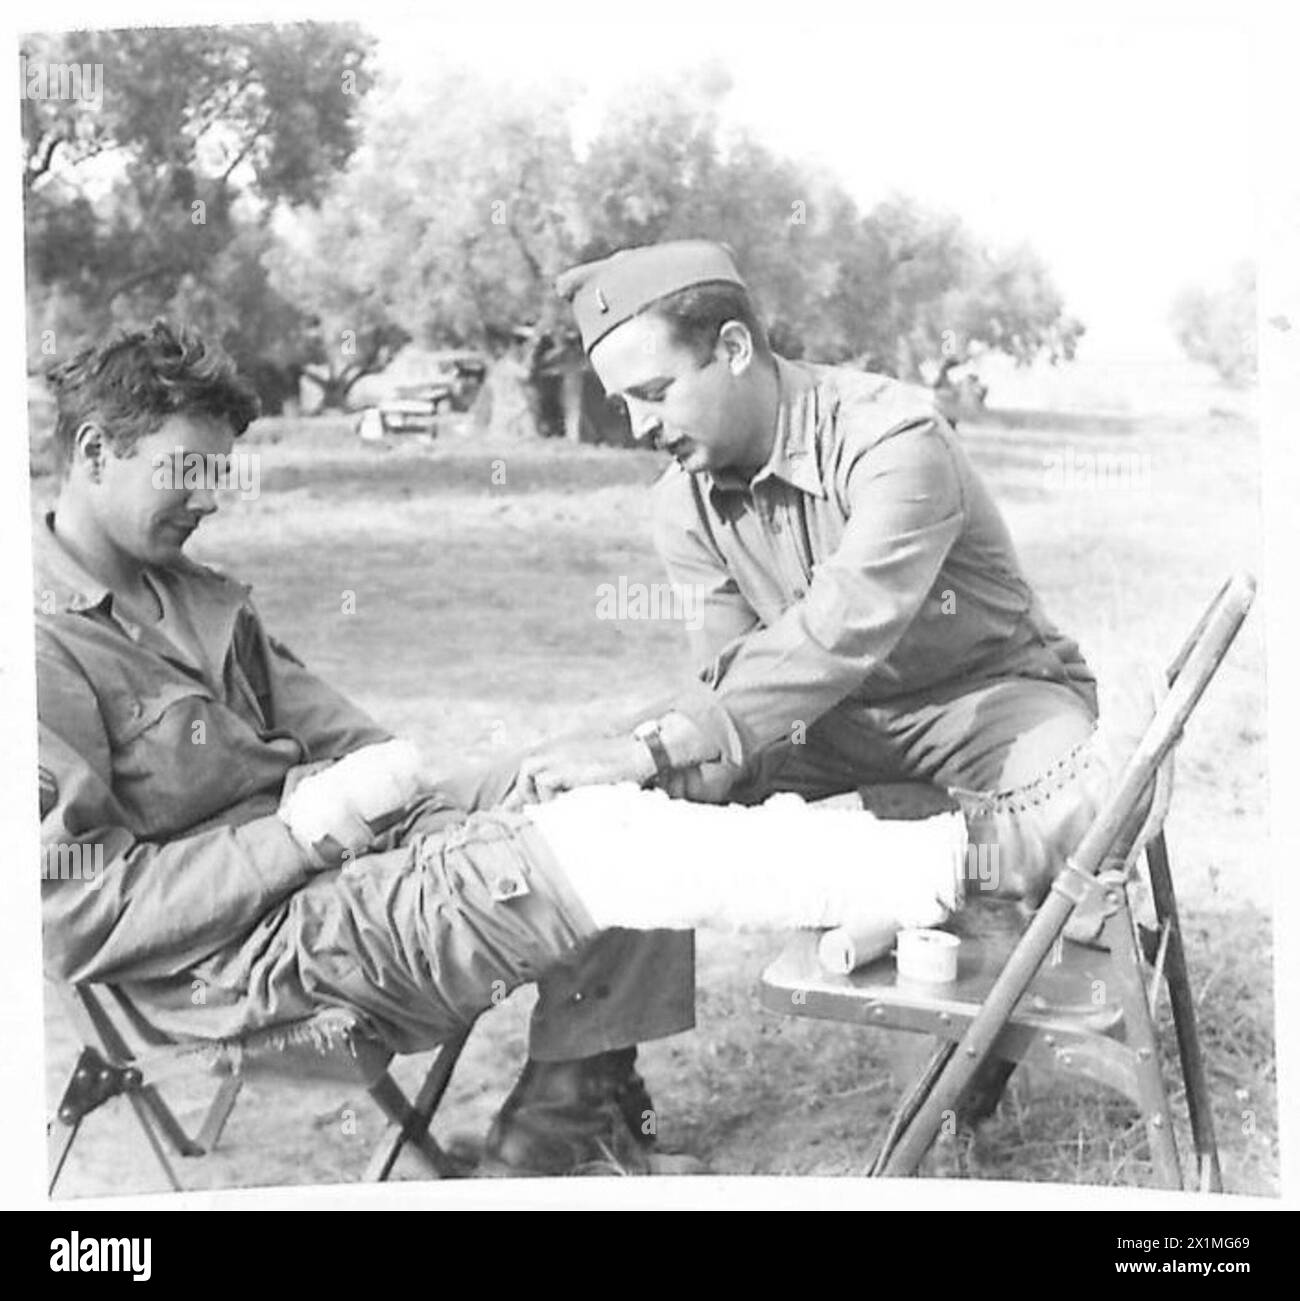 AMERICAN ENGINEERS SERVING WITH THE EIGHTH ARMY - The American M.O. attends to a casualty, British Army Stock Photo